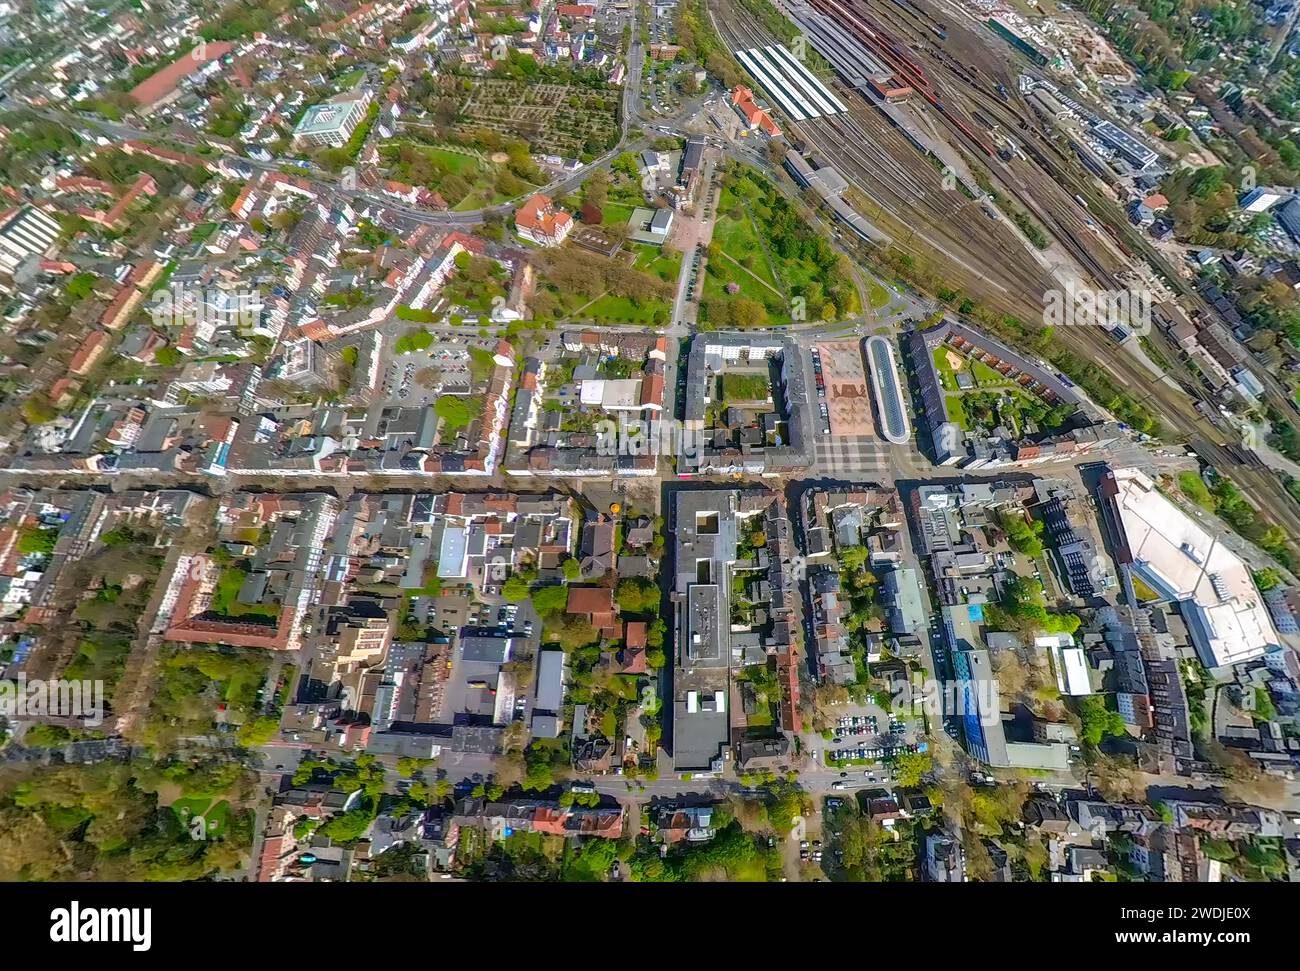 Aerial view, Herne-Wanne Mitte, city center and main street at Herne Wanne-Eickel station, earth globe, fisheye image, 360 degree image, Wanne, Herne, Stock Photo